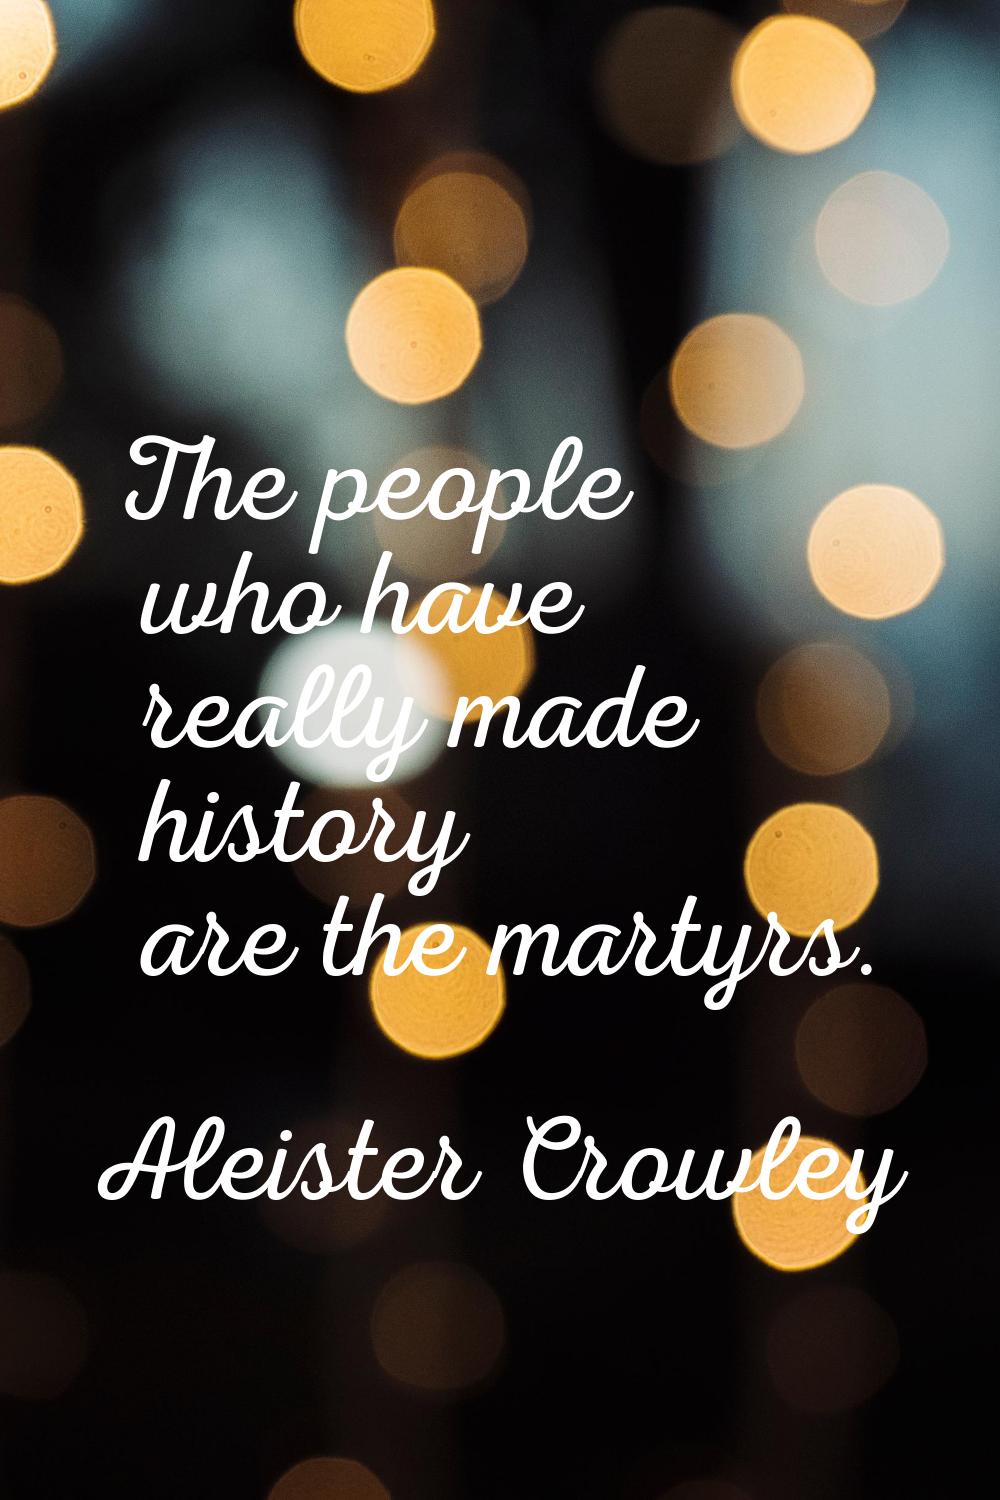 The people who have really made history are the martyrs.